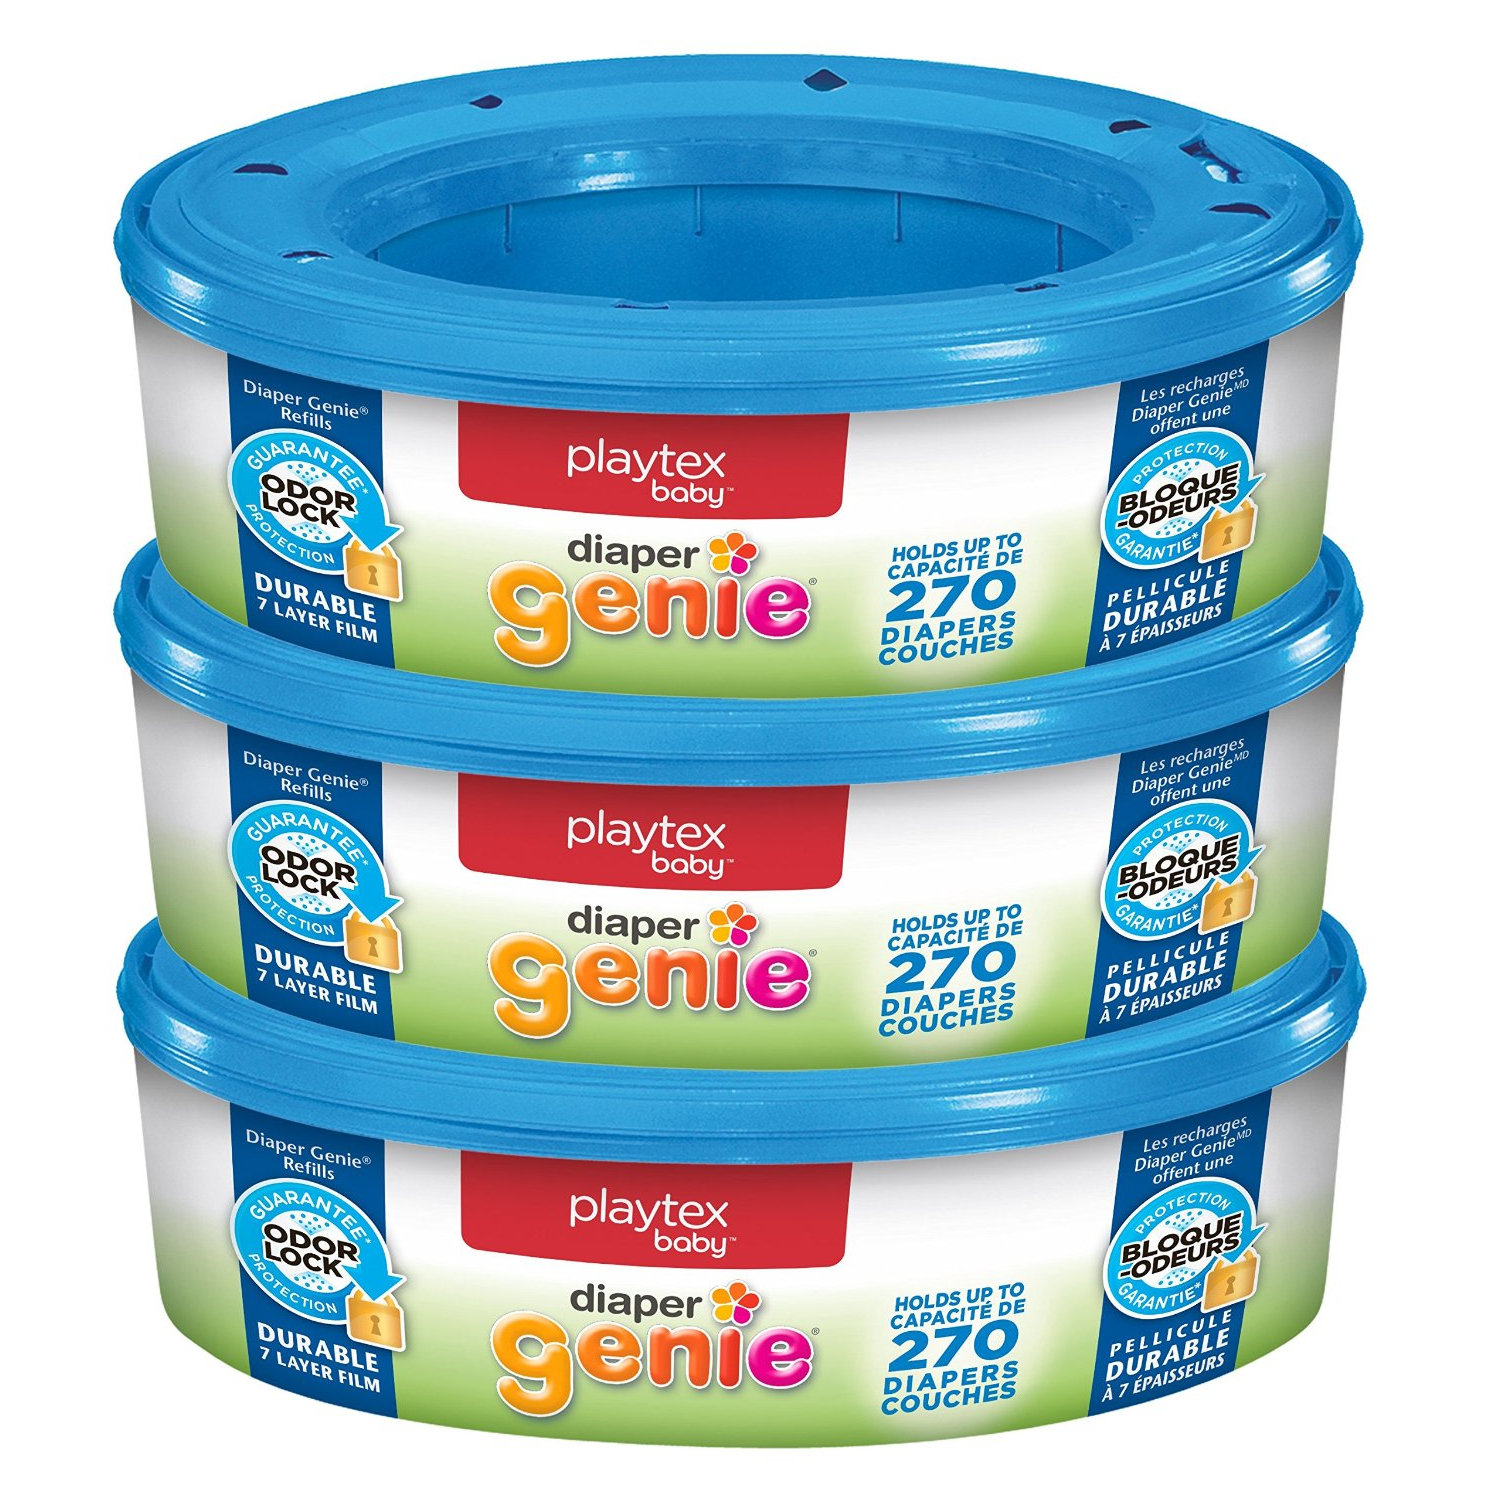 Playtex Diaper Genie Refills (270 Count) Pack of 3 Only $14.96 Shipped!